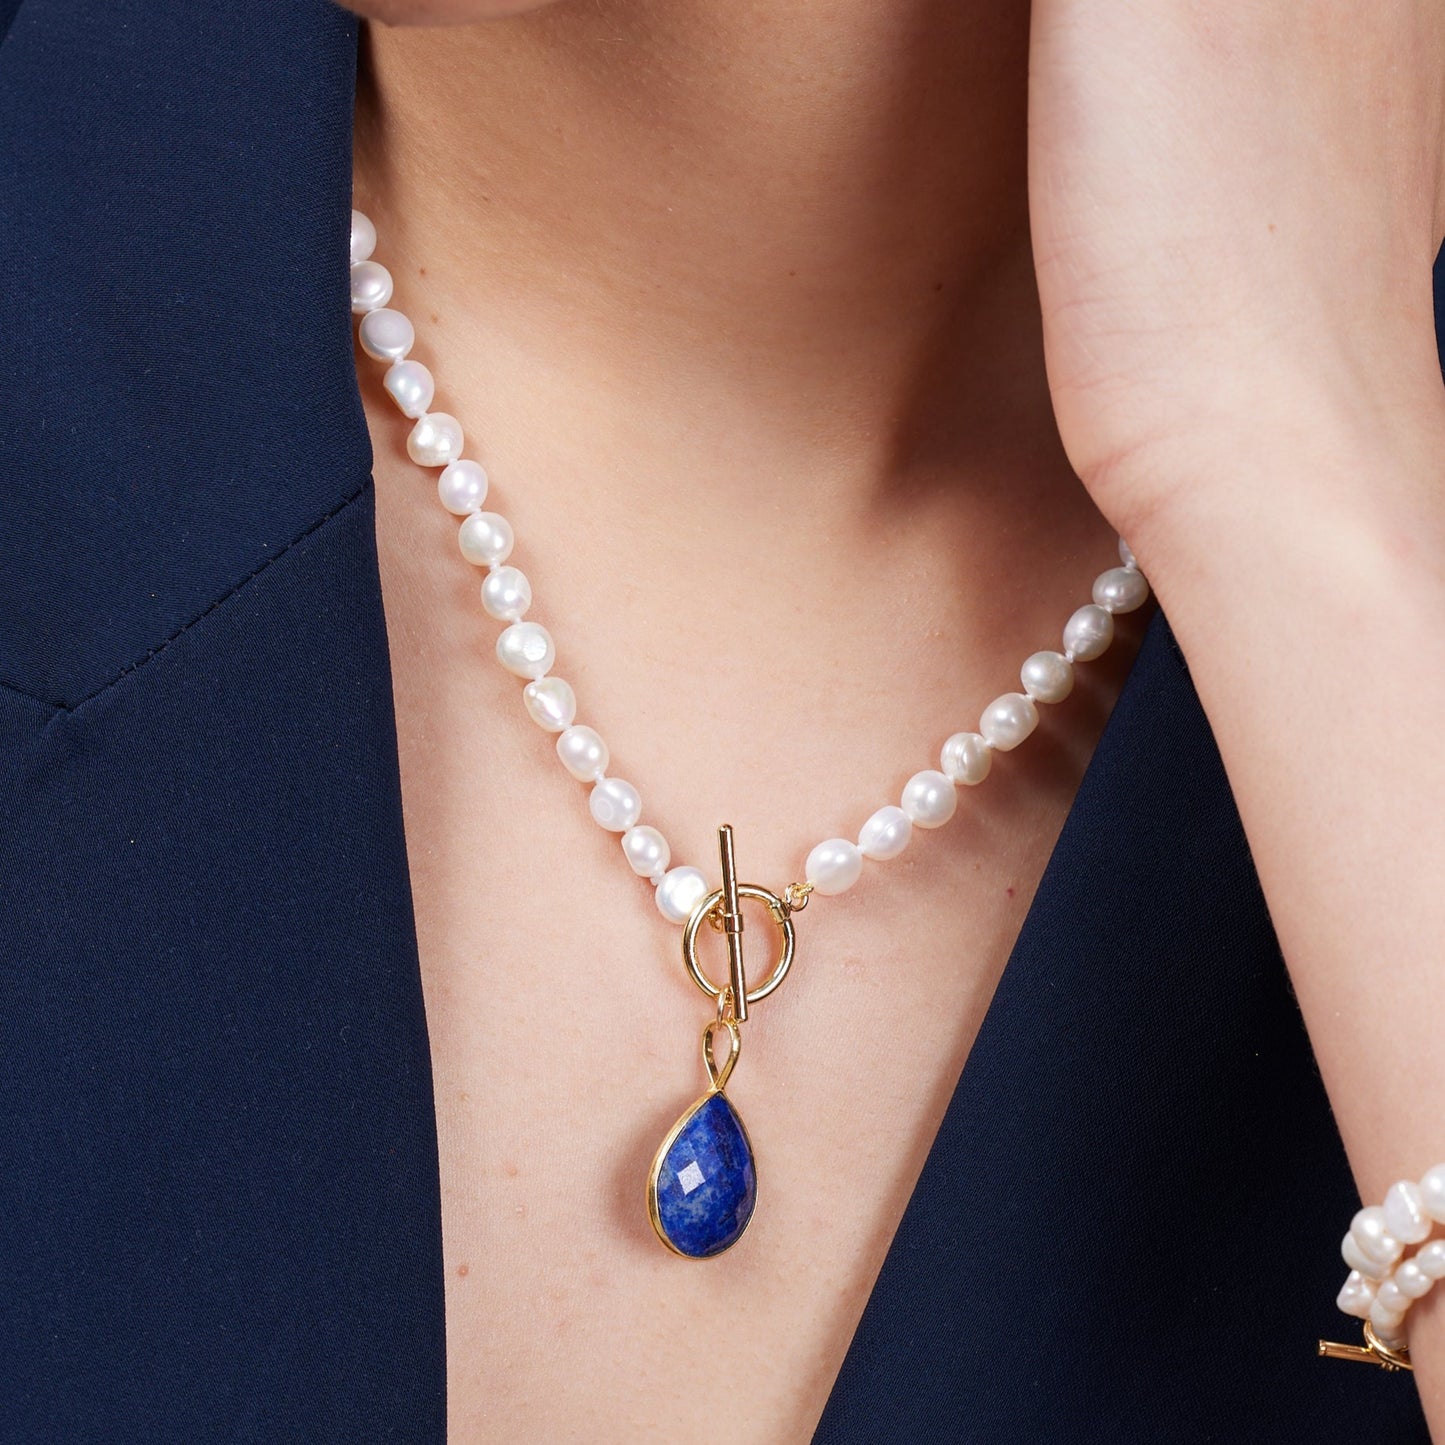 Clara cultured freshwater pearl necklace with lapis lazuli gold vermeil drop